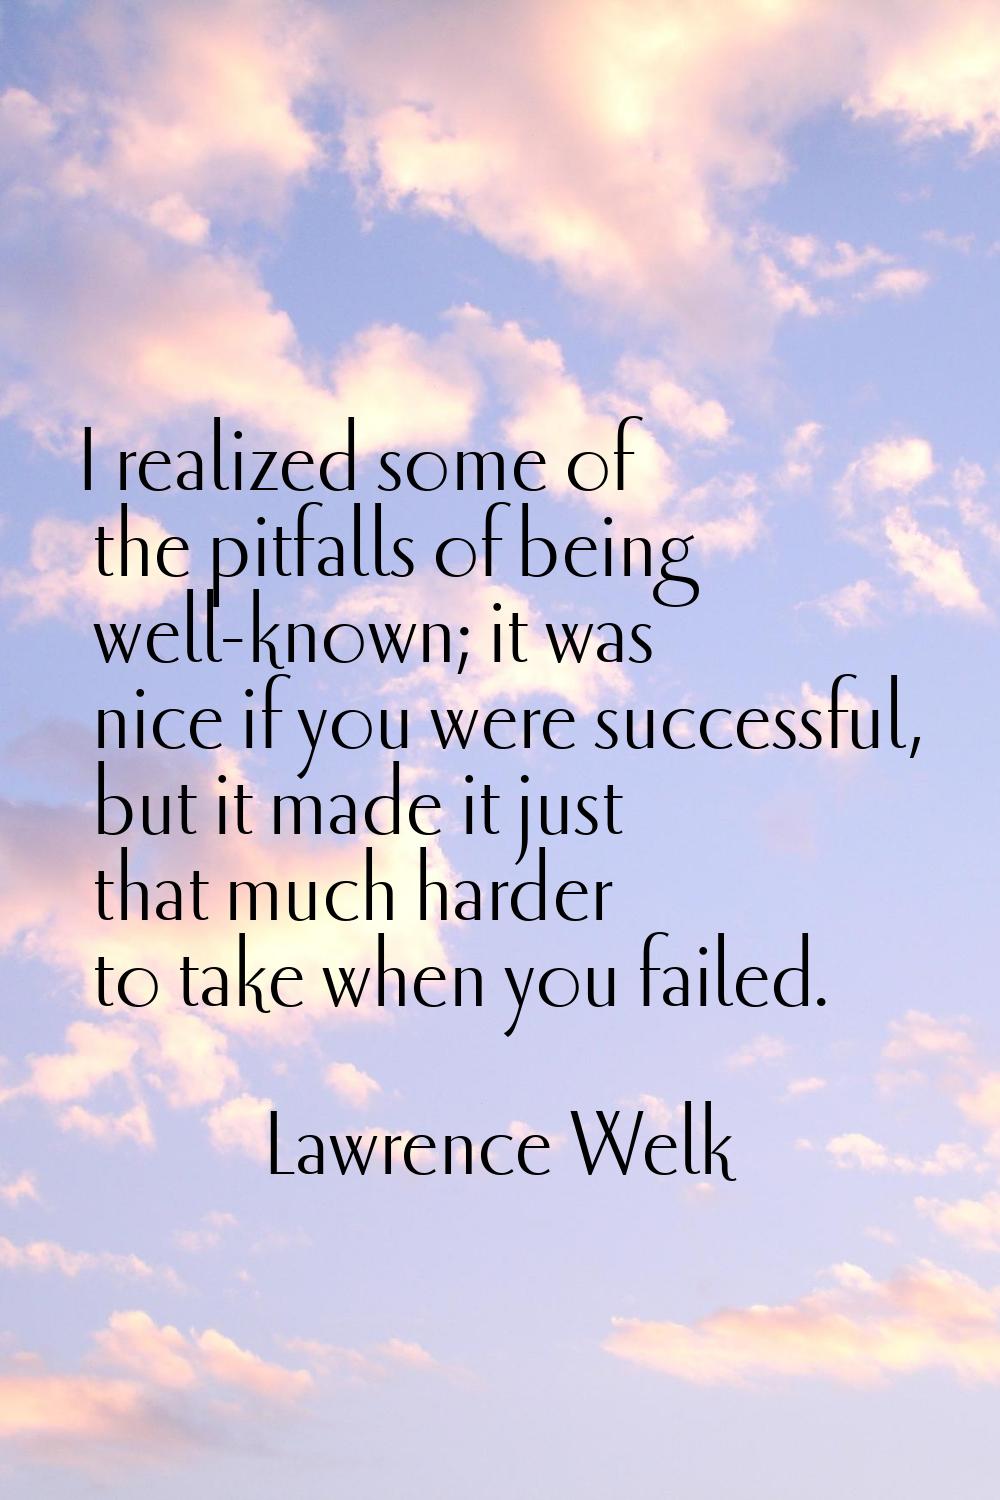 I realized some of the pitfalls of being well-known; it was nice if you were successful, but it mad